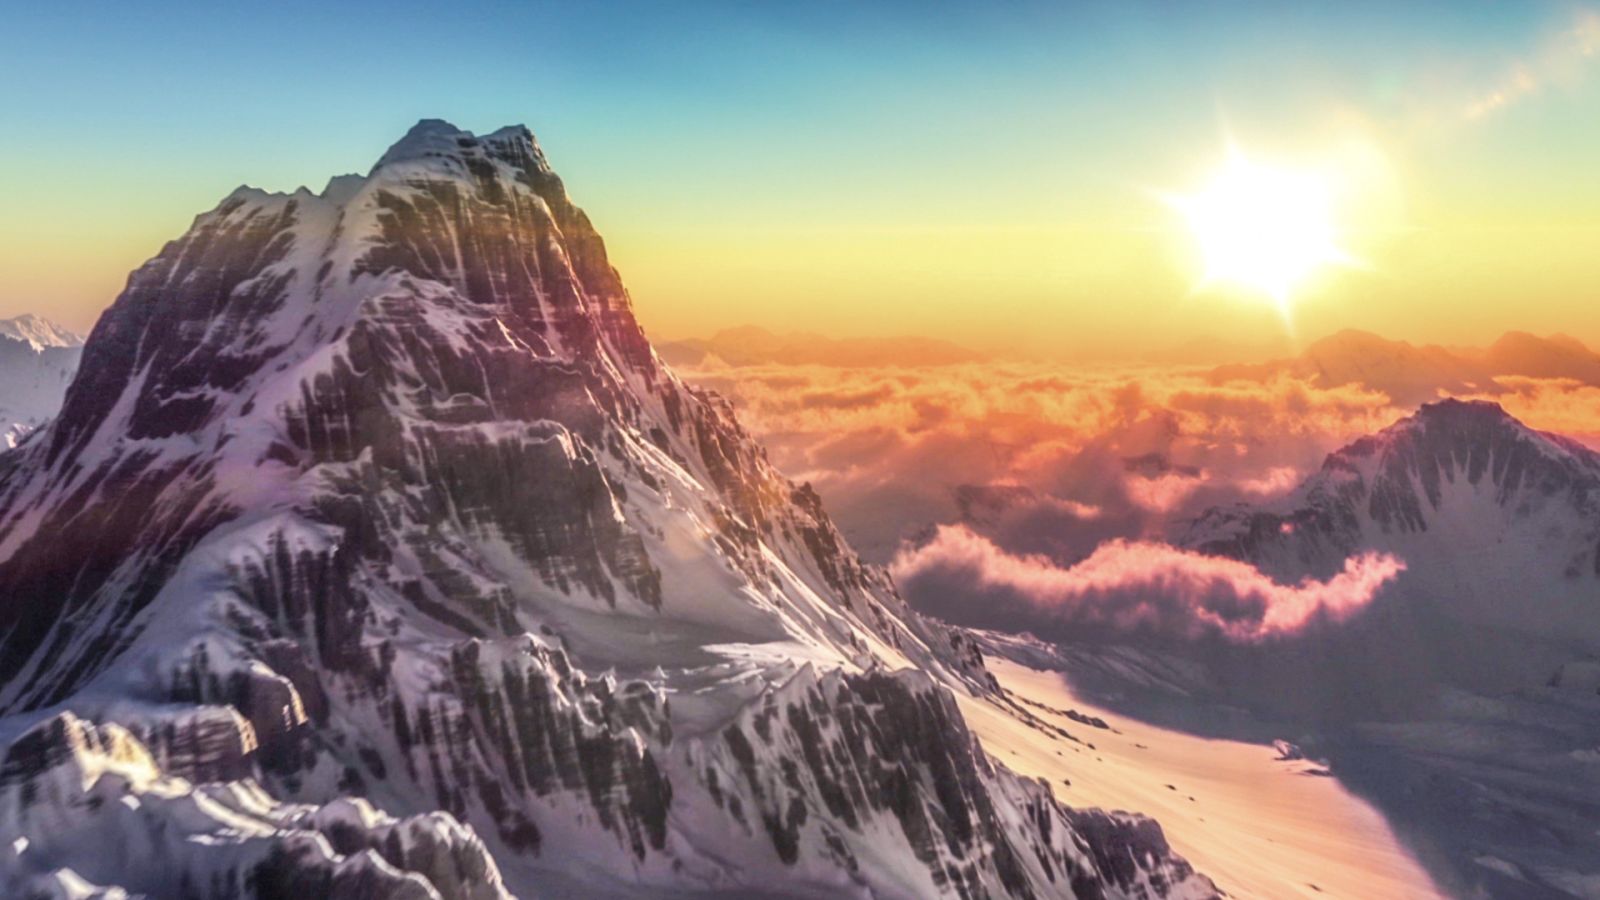 15 Minutes of Mountainscapes for Meditation, Relaxation & Stress Relief